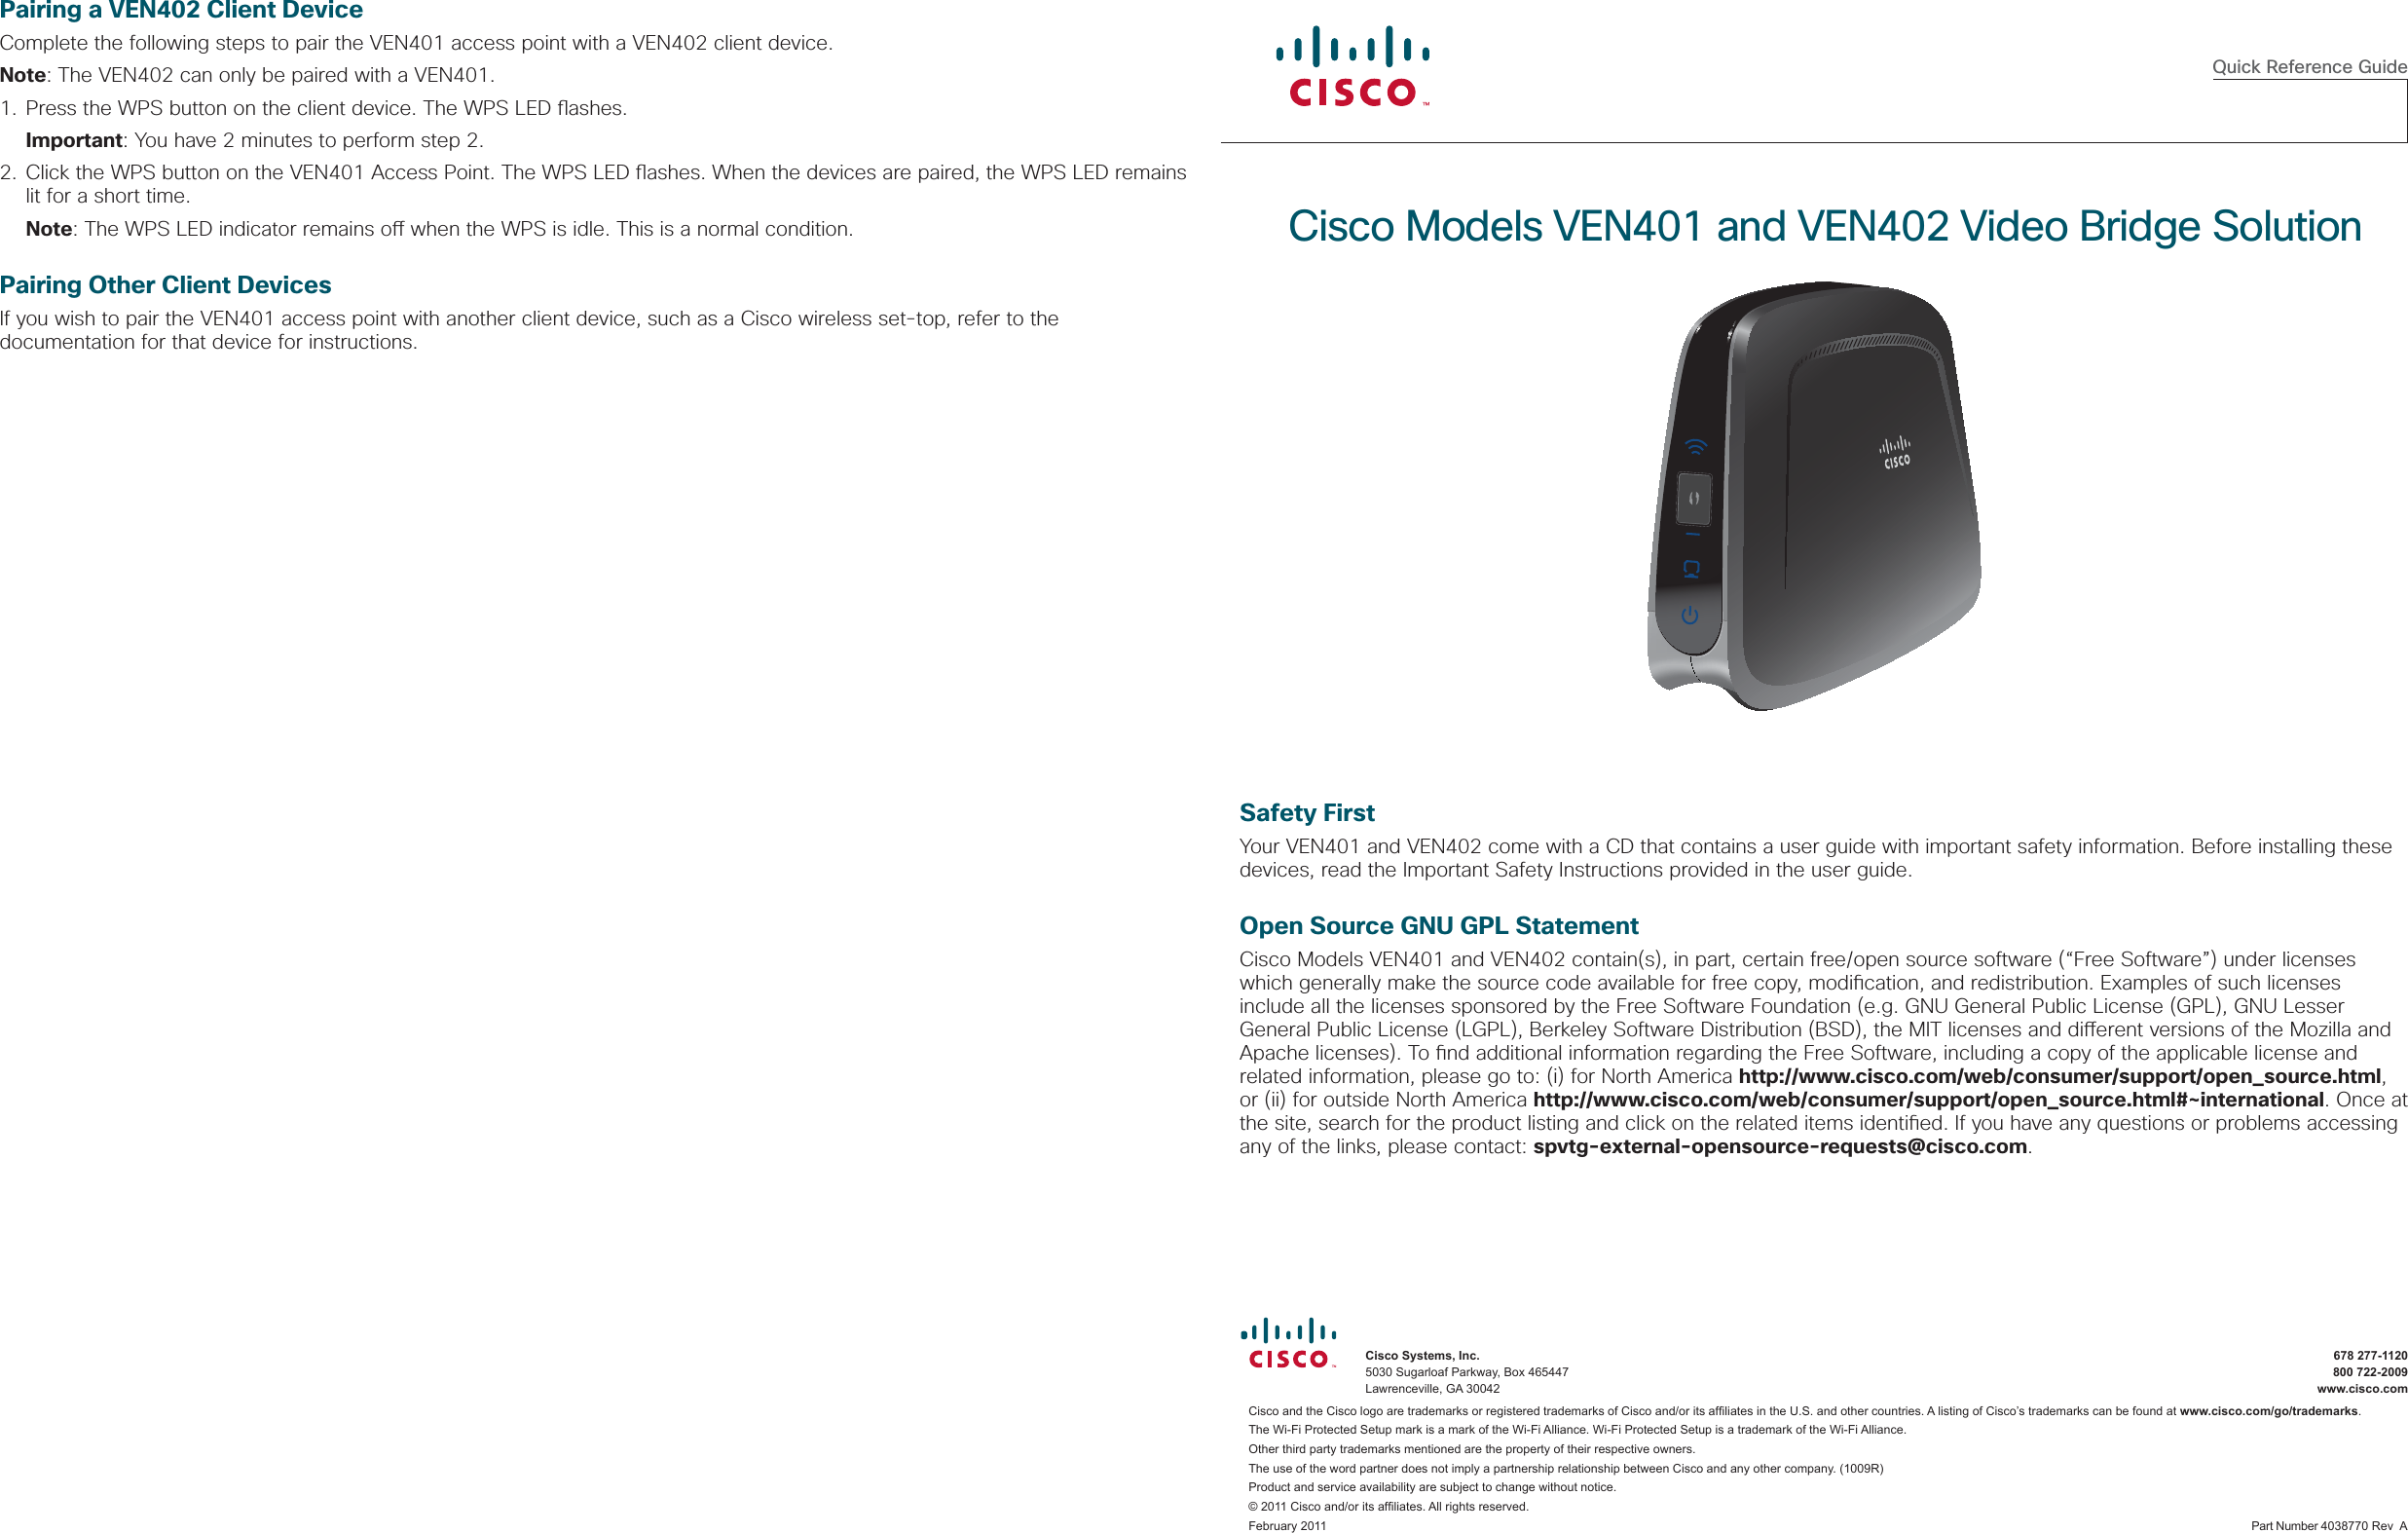  Quick Reference GuideCisco Models VEN401 and VEN402 Video Bridge Solution  Cisco Systems, Inc.   678 277-1120  5030 Sugarloaf Parkway, Box 465447    800 722-2009  Lawrenceville, GA 30042    www.cisco.comCisco and the Cisco logo are trademarks or registered trademarks of Cisco and/or its afﬁ liates in the U.S. and other countries. A listing of Cisco’s trademarks can be found at www.cisco.com/go/trademarks. The Wi-Fi Protected Setup mark is a mark of the Wi-Fi Alliance. Wi-Fi Protected Setup is a trademark of the Wi-Fi Alliance. Other third party trademarks mentioned are the property of their respective owners. The use of the word partner does not imply a partnership relationship between Cisco and any other company. (1009R)Product and service availability are subject to change without notice.© 2011 Cisco and/or its afﬁ liates. All rights reserved.February 2011      Part Number 4038770 Rev  ASafety FirstYour VEN401 and VEN402 come with a CD that contains a user guide with important safety information. Before installing these devices, read the Important Safety Instructions provided in the user guide.Open Source GNU GPL StatementCisco Models VEN401 and VEN402 contain(s), in part, certain free/open source software (“Free Software”) under licenses which generally make the source code available for free copy, modi cation, and redistribution. Examples of such licenses include all the licenses sponsored by the Free Software Foundation (e.g. GNU General Public License (GPL), GNU Lesser General Public License (LGPL), Berkeley Software Distribution (BSD), the MIT licenses and di erent versions of the Mozilla and Apache licenses). To  nd additional information regarding the Free Software, including a copy of the applicable license and related information, please go to: (i) for North America http://www.cisco.com/web/consumer/support/open_source.html, or (ii) for outside North America http://www.cisco.com/web/consumer/support/open_source.html#~international. Once at the site, search for the product listing and click on the related items identi ed. If you have any questions or problems accessing any of the links, please contact: spvtg-external-opensource-requests@cisco.com.Pairing a VEN402 Client DeviceComplete the following steps to pair the VEN401 access point with a VEN402 client device.Note: The VEN402 can only be paired with a VEN401.1. Press the WPS button on the client device. The WPS LED  ashes. Important: You have 2 minutes to perform step 2.2. Click the WPS button on the VEN401 Access Point. The WPS LED  ashes. When the devices are paired, the WPS LED remains lit for a short time. Note: The WPS LED indicator remains o  when the WPS is idle. This is a normal condition.Pairing Other Client DevicesIf you wish to pair the VEN401 access point with another client device, such as a Cisco wireless set-top, refer to the documentation for that device for instructions.